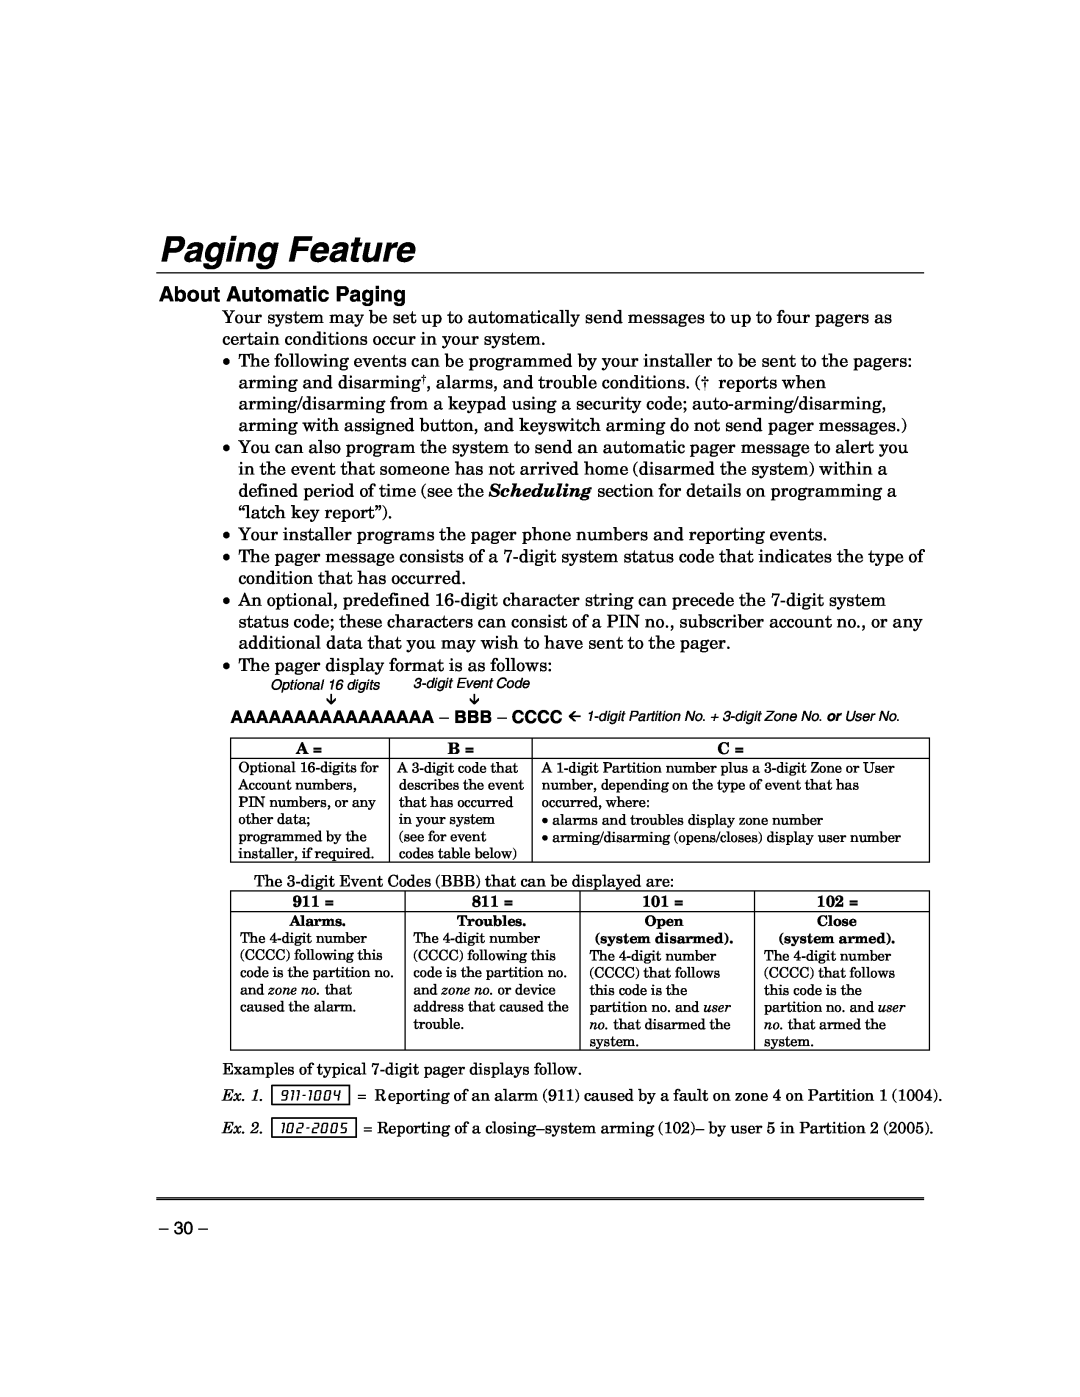 Honeywell VISTA-21IPSIA manual Paging Feature, About Automatic Paging 